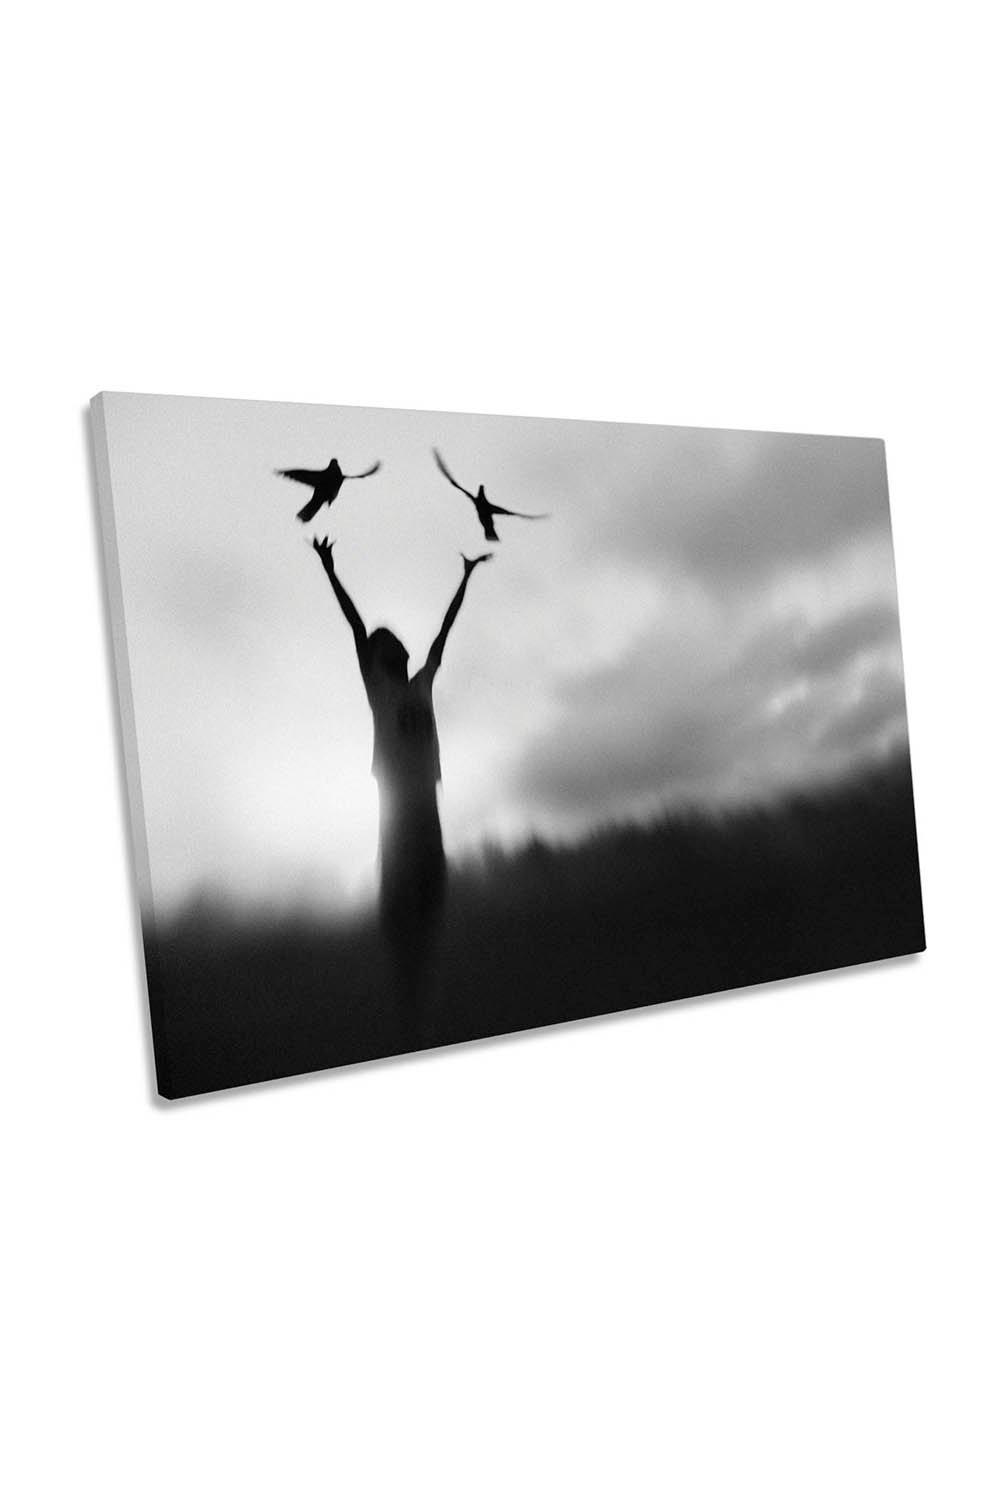 Free Fly Freedom Wish Hope Birds Canvas Wall Art Picture Print